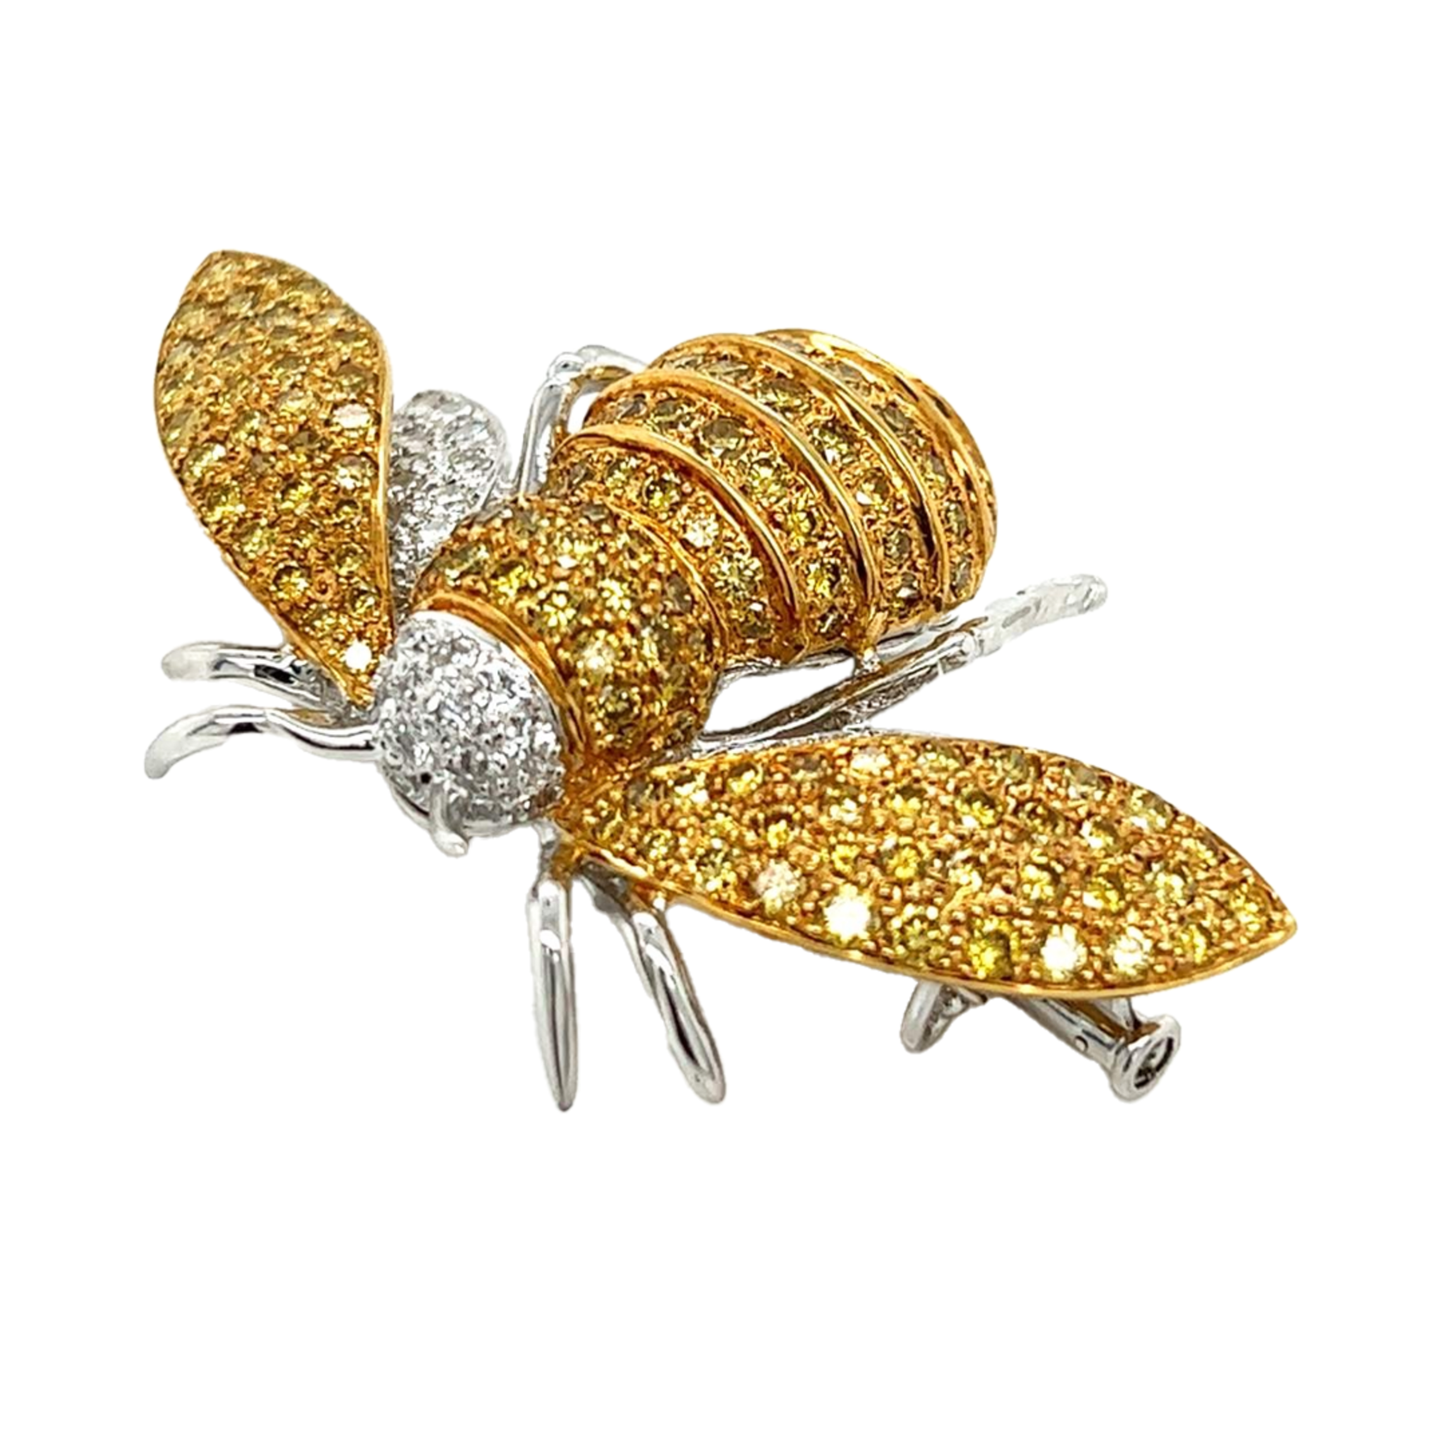 Post-1980s 18KT Yellow & White Gold Diamond Bumble Bee Brooch side and top